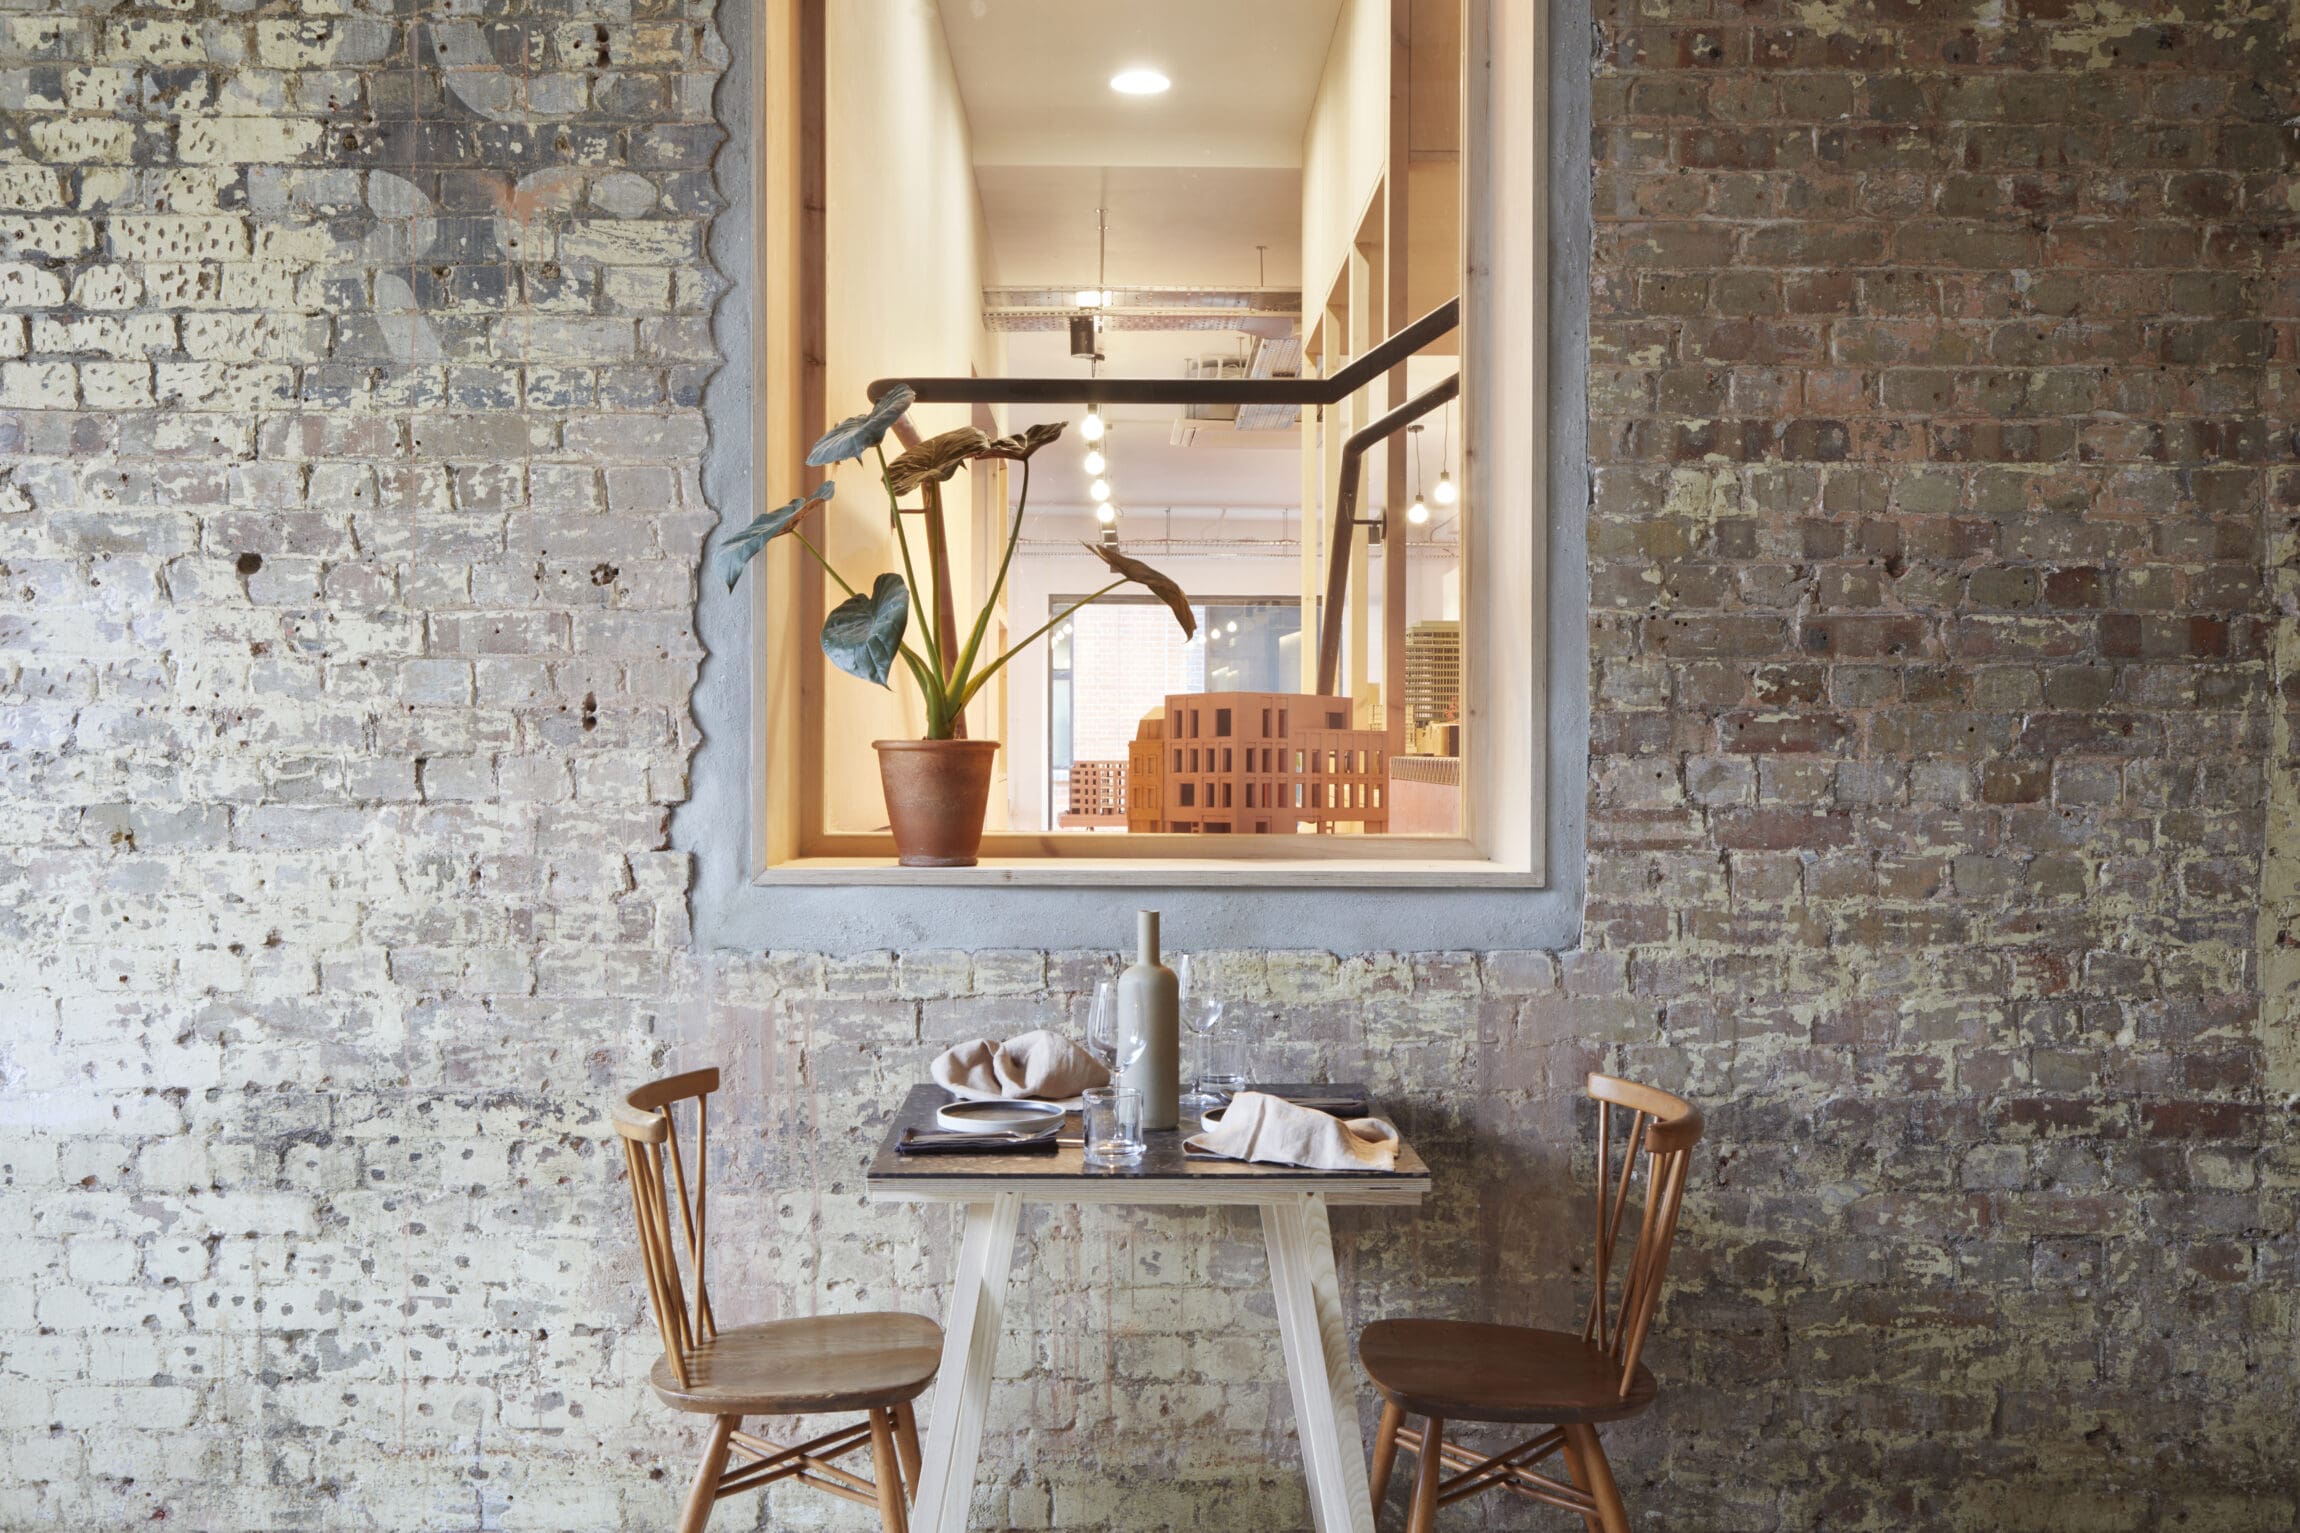 The best restaurants in Hackney | A table and two chairs stand before an exposed brick wall with a window frame opening above it where a pot plant sits.